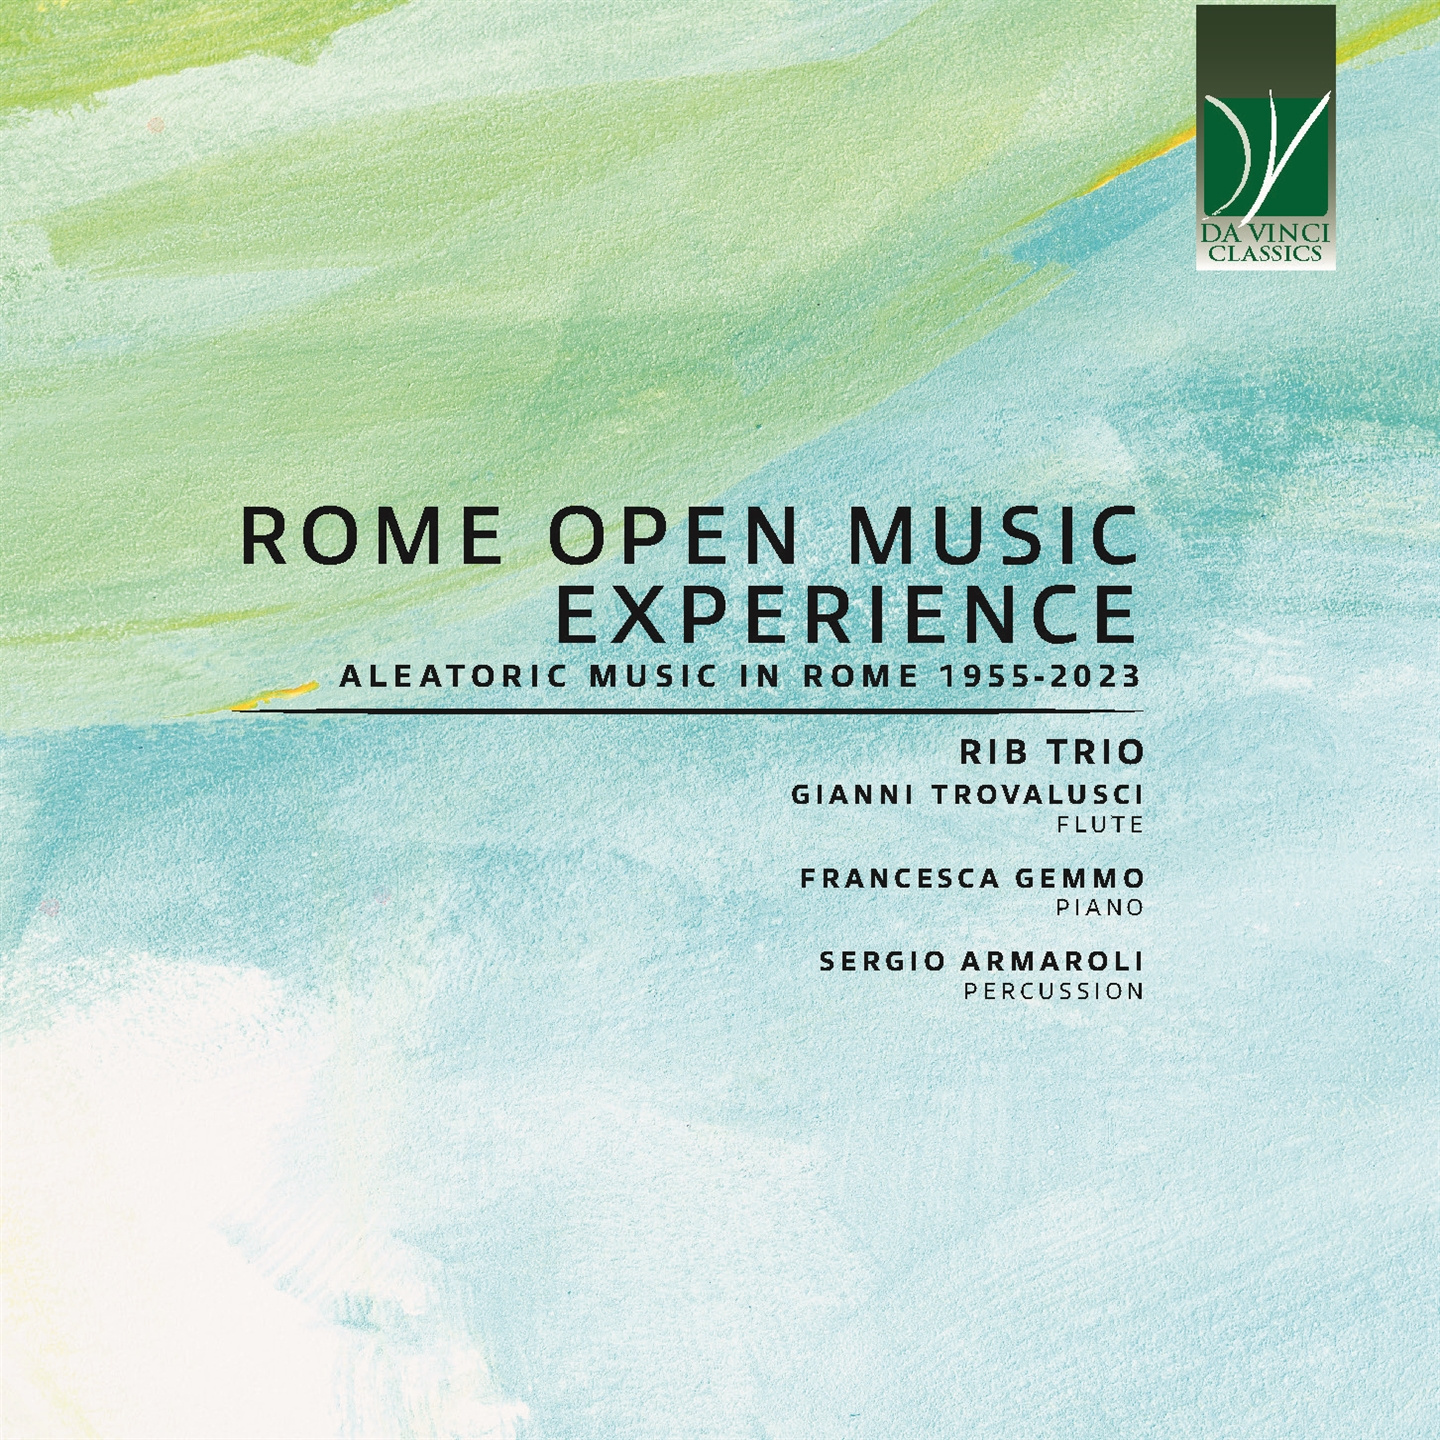 ROME OPEN MUSIC EXPERIENCE: ALEATORIC MUSIC IN ROME 1955-2023